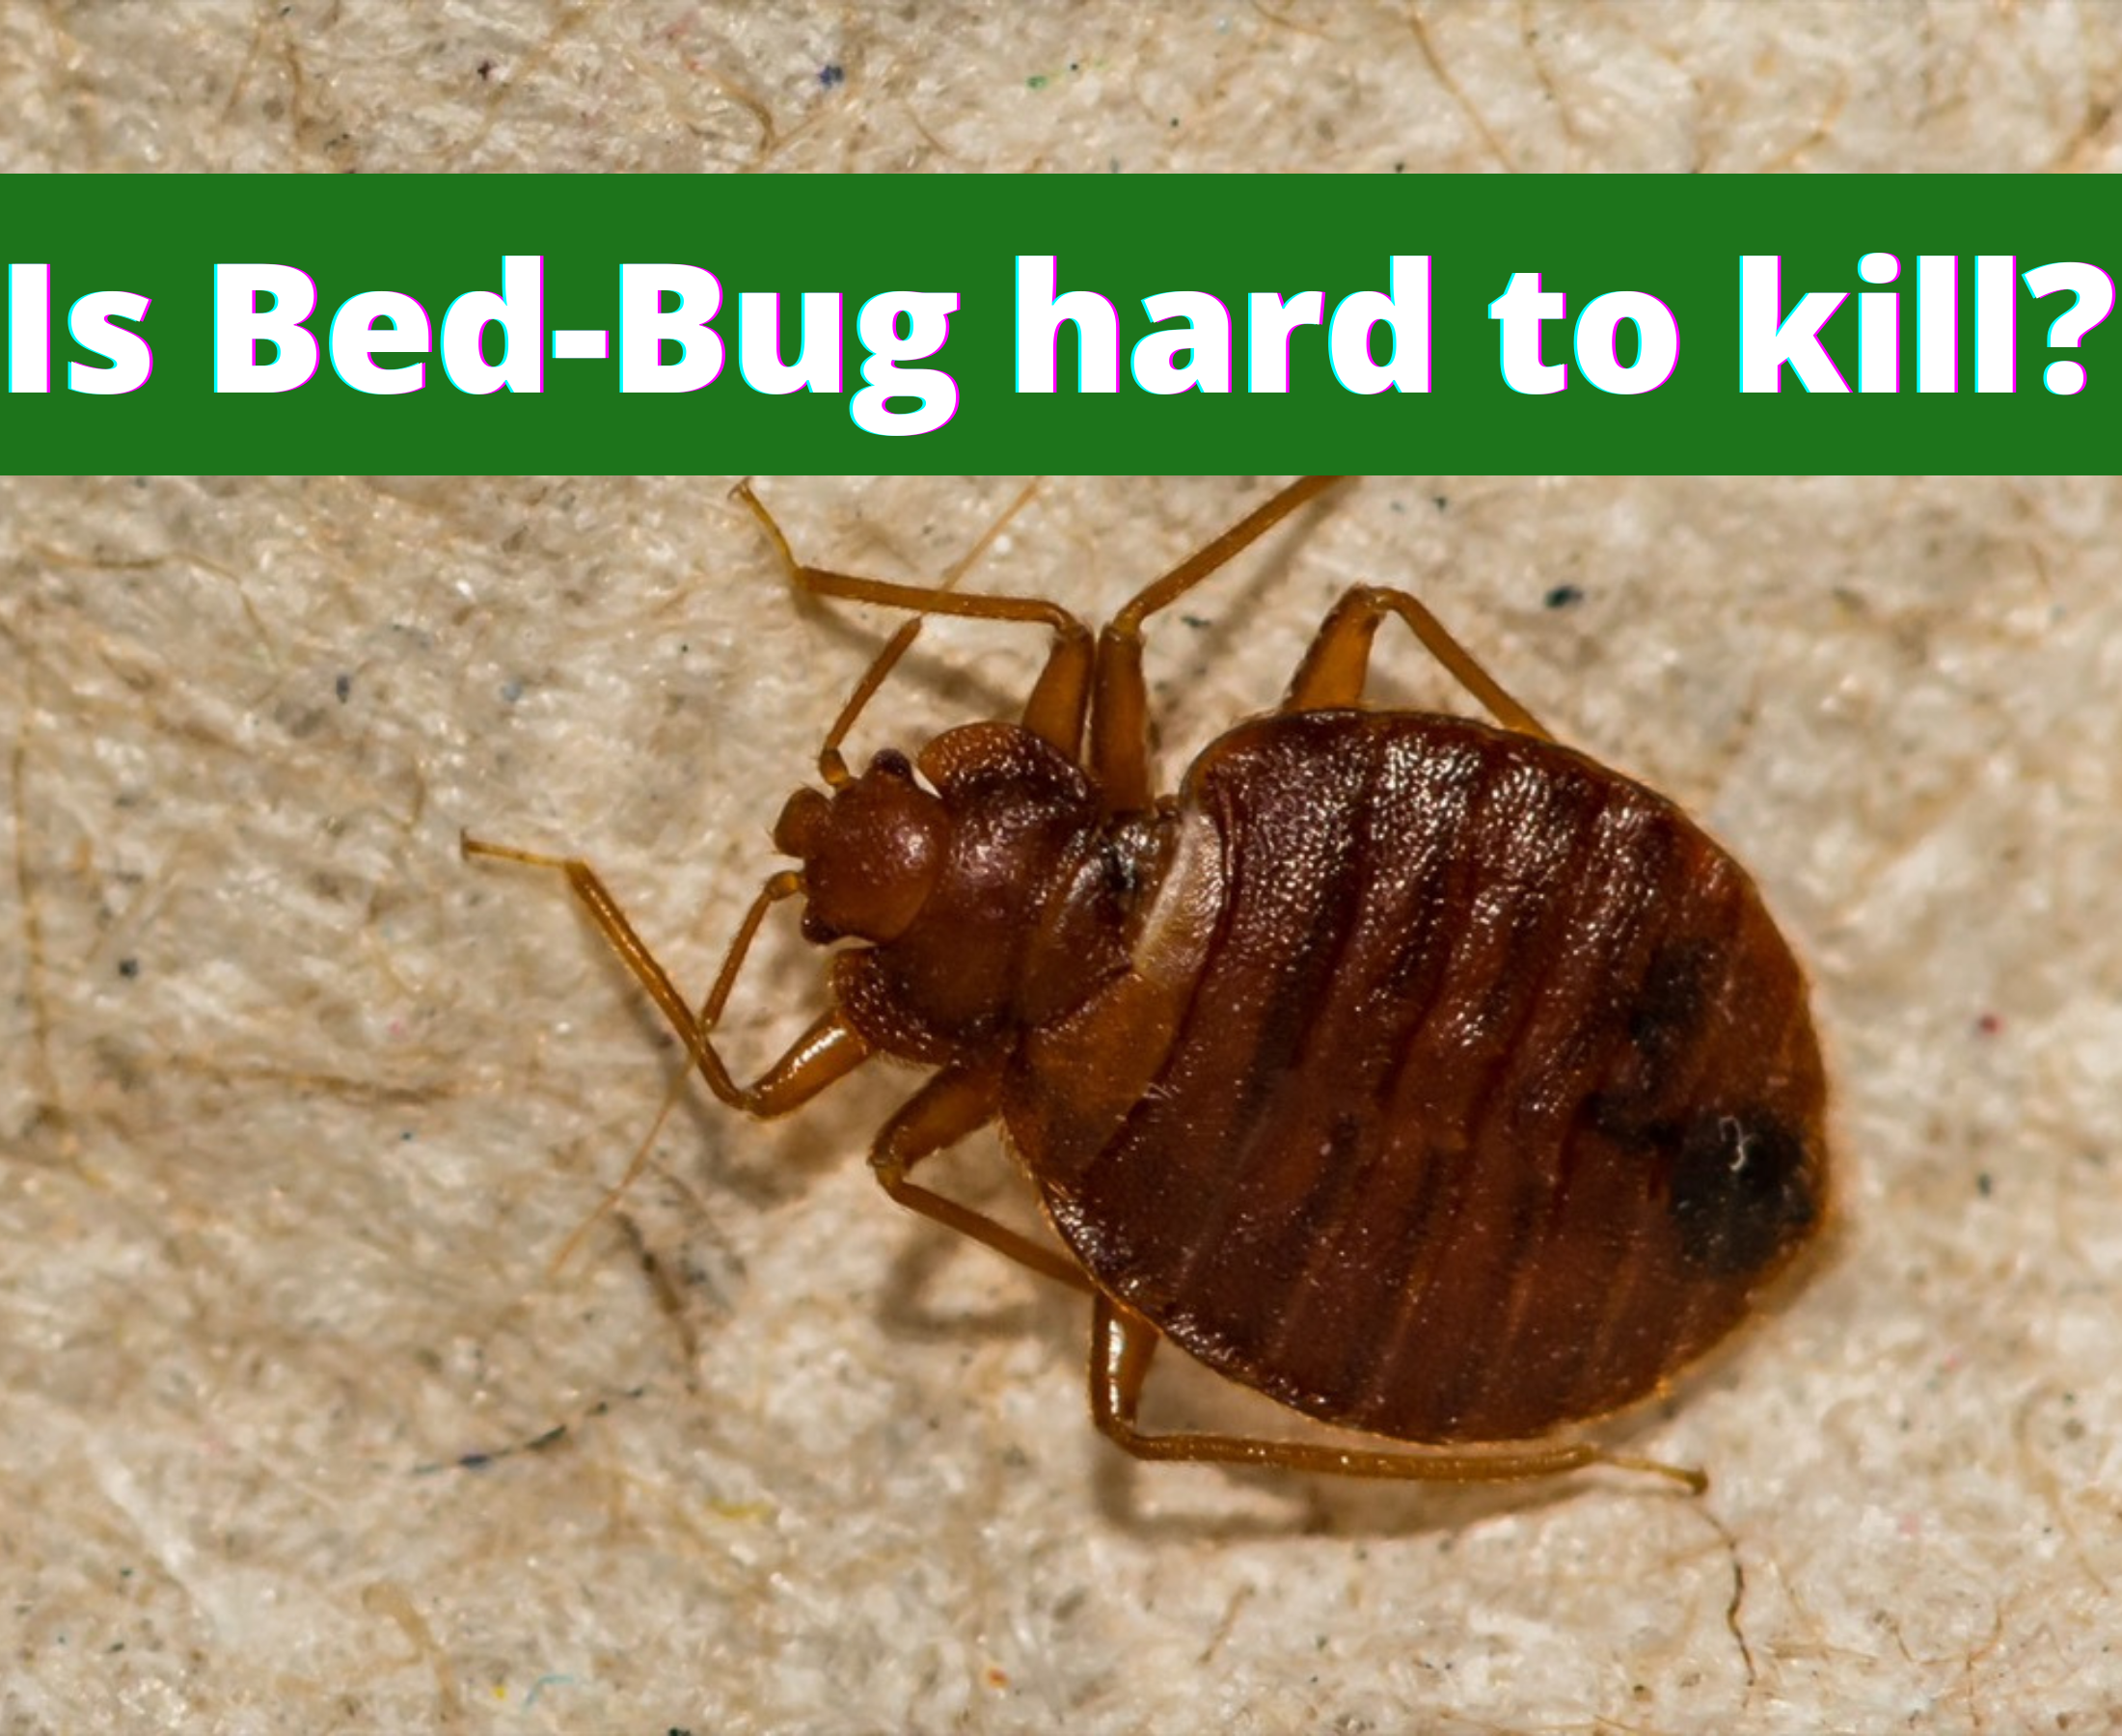 How to kill bed bugs at home?